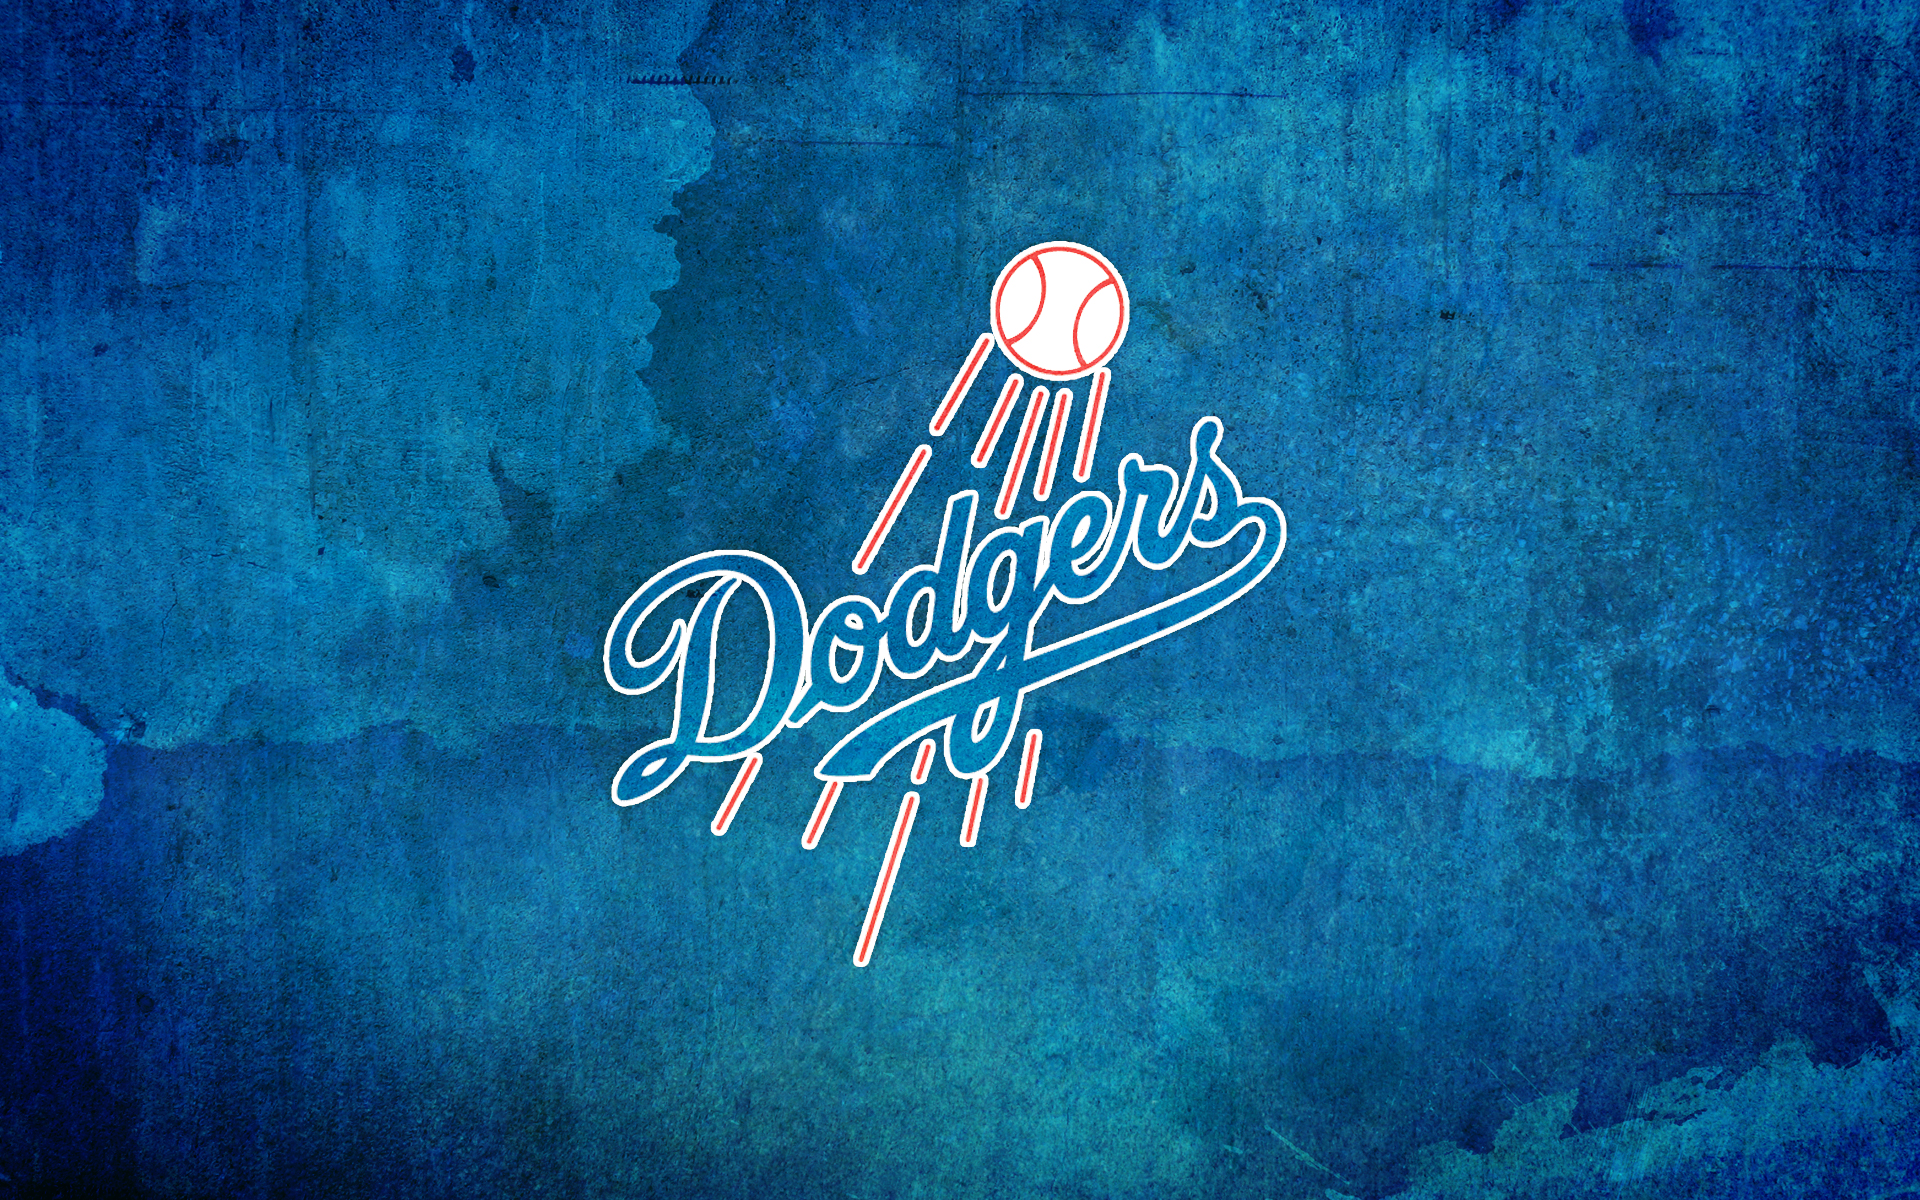  Angeles Dodgers wallpapers Los Angeles Dodgers background   Page 4